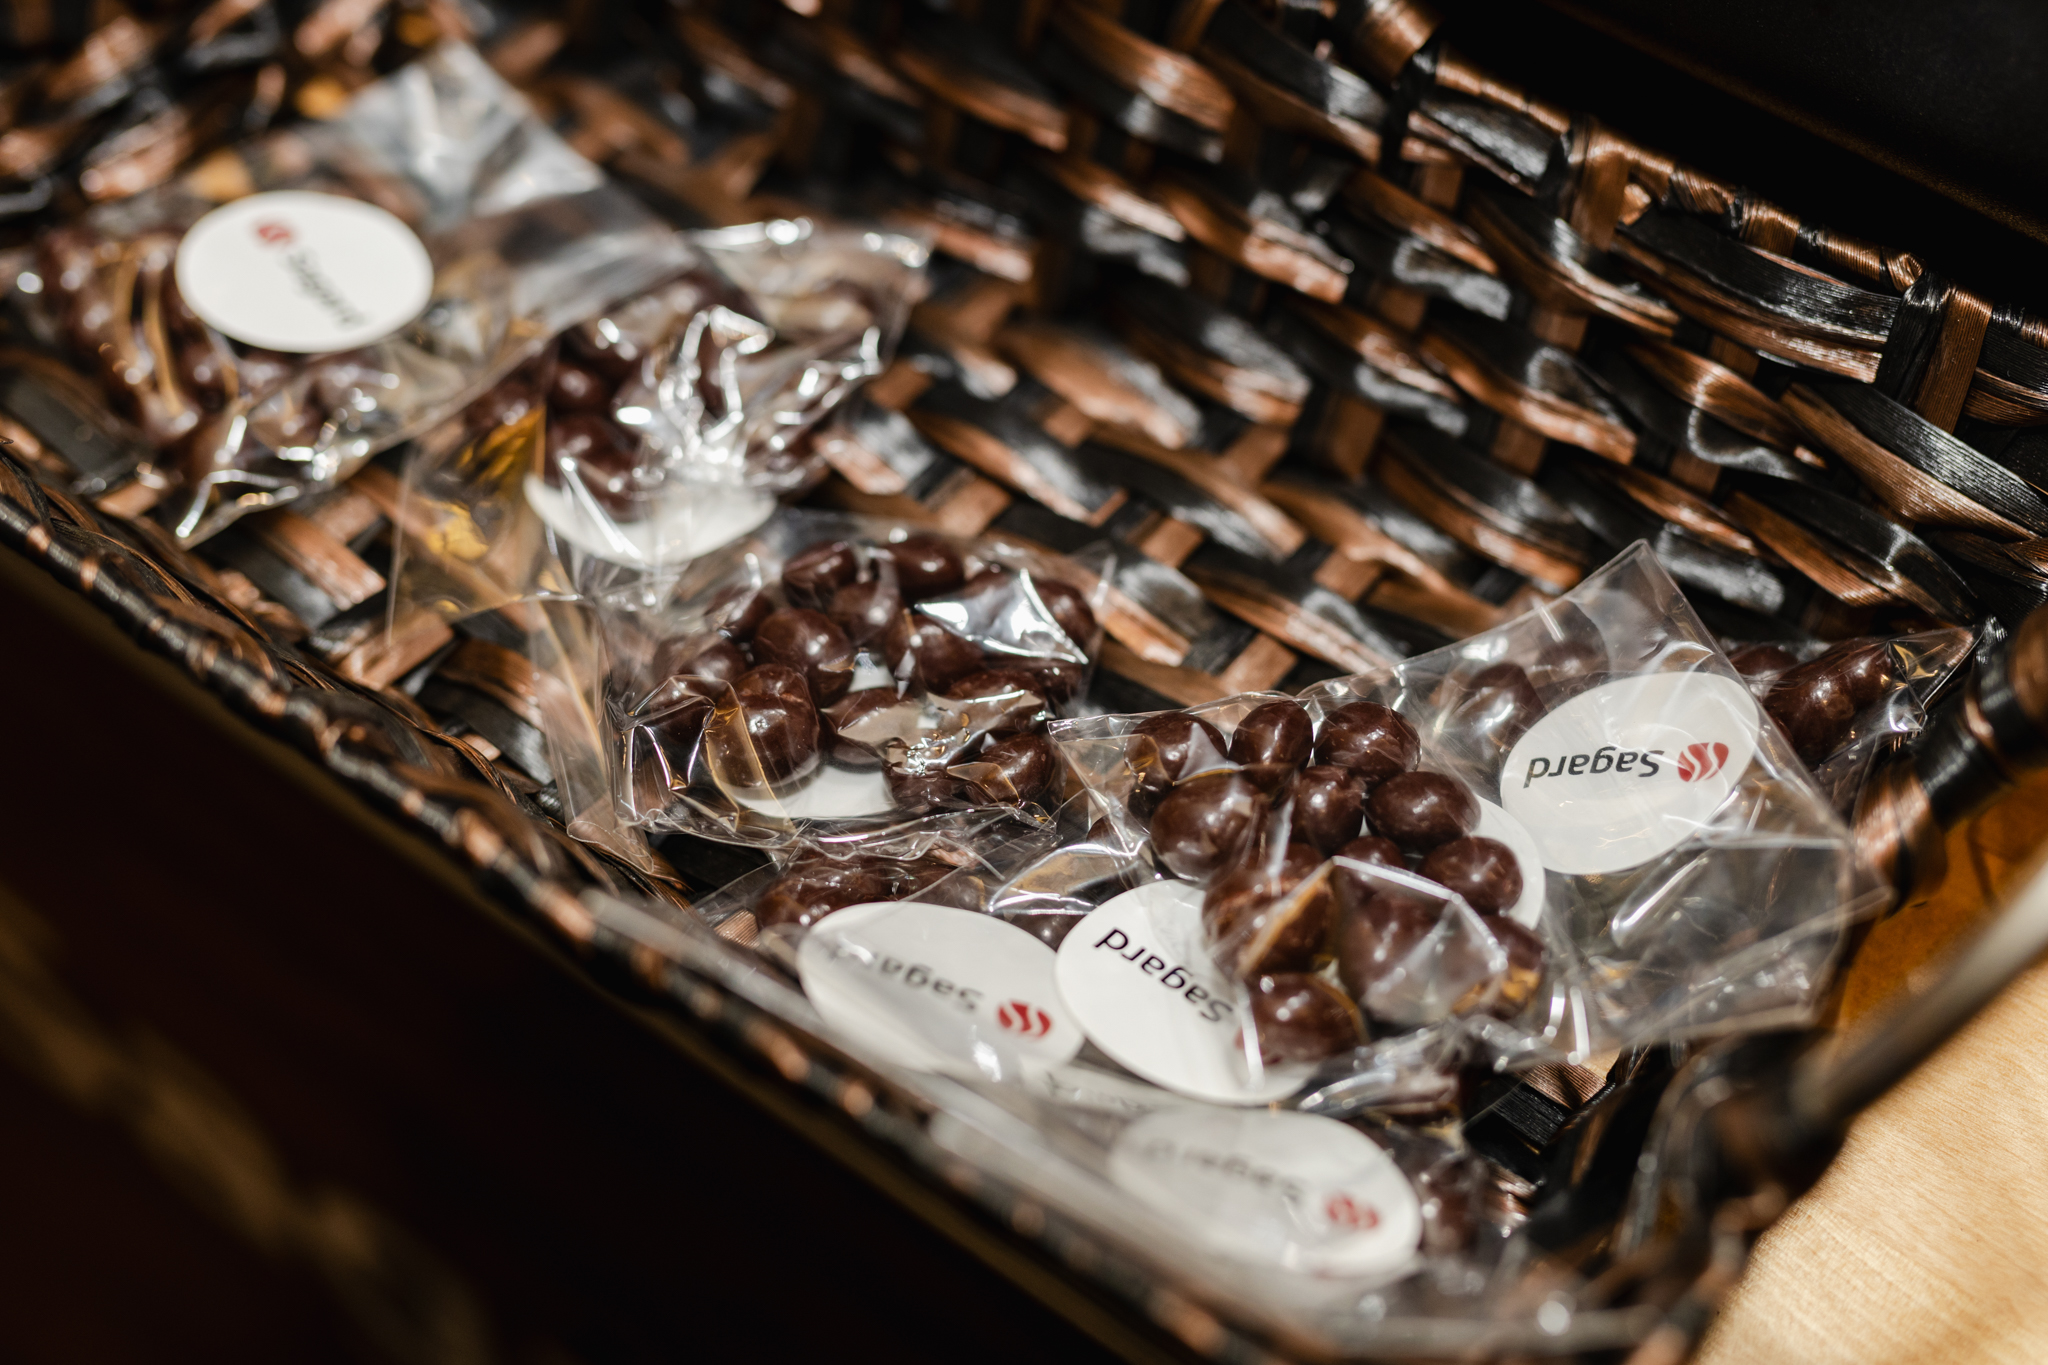 Conference attendees enjoying a delectable assortment of chocolates displayed in an elegant basket on a table.